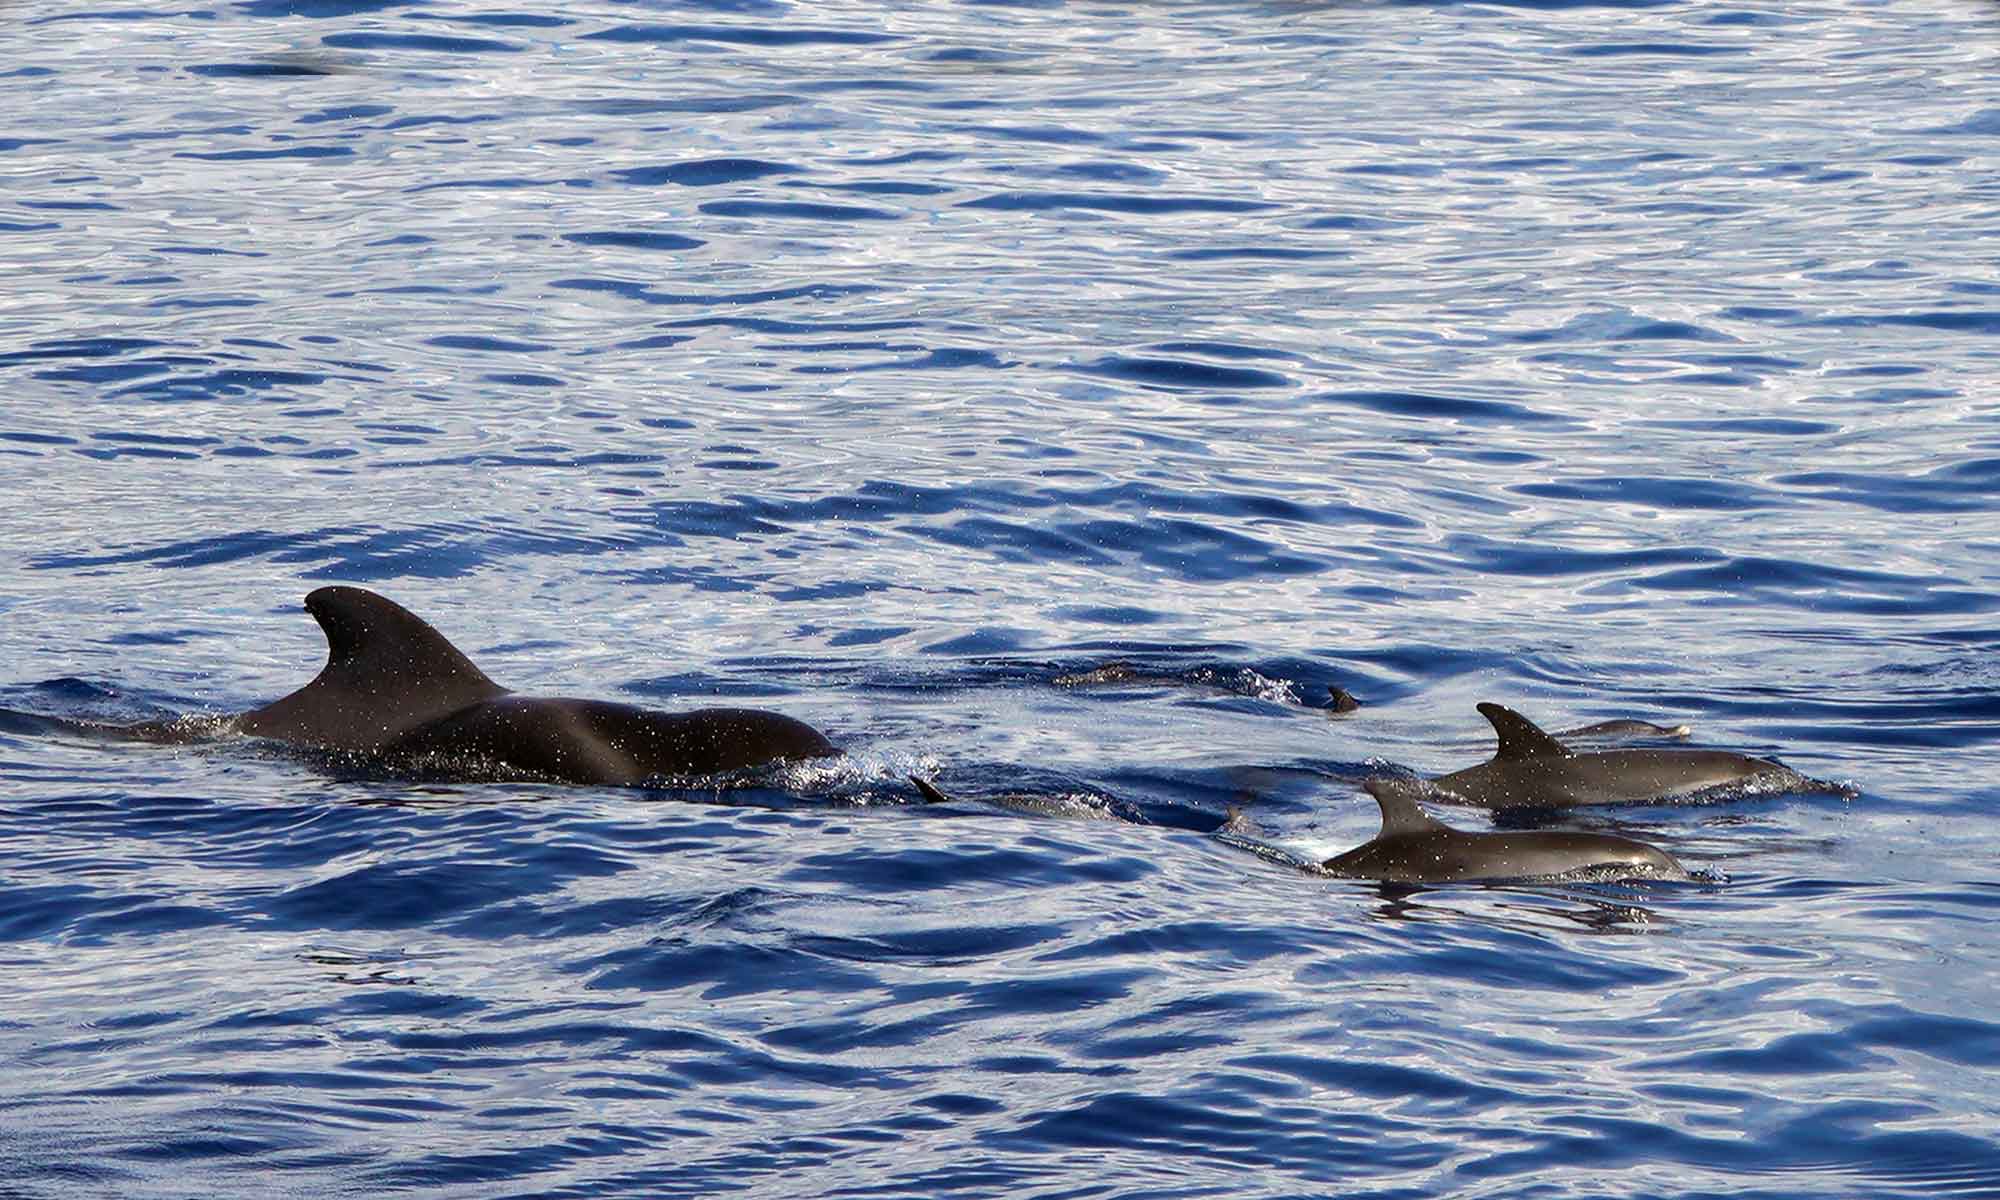 Pilot whales mixing with Spotted dolphins was a rare and beautiful sighting.